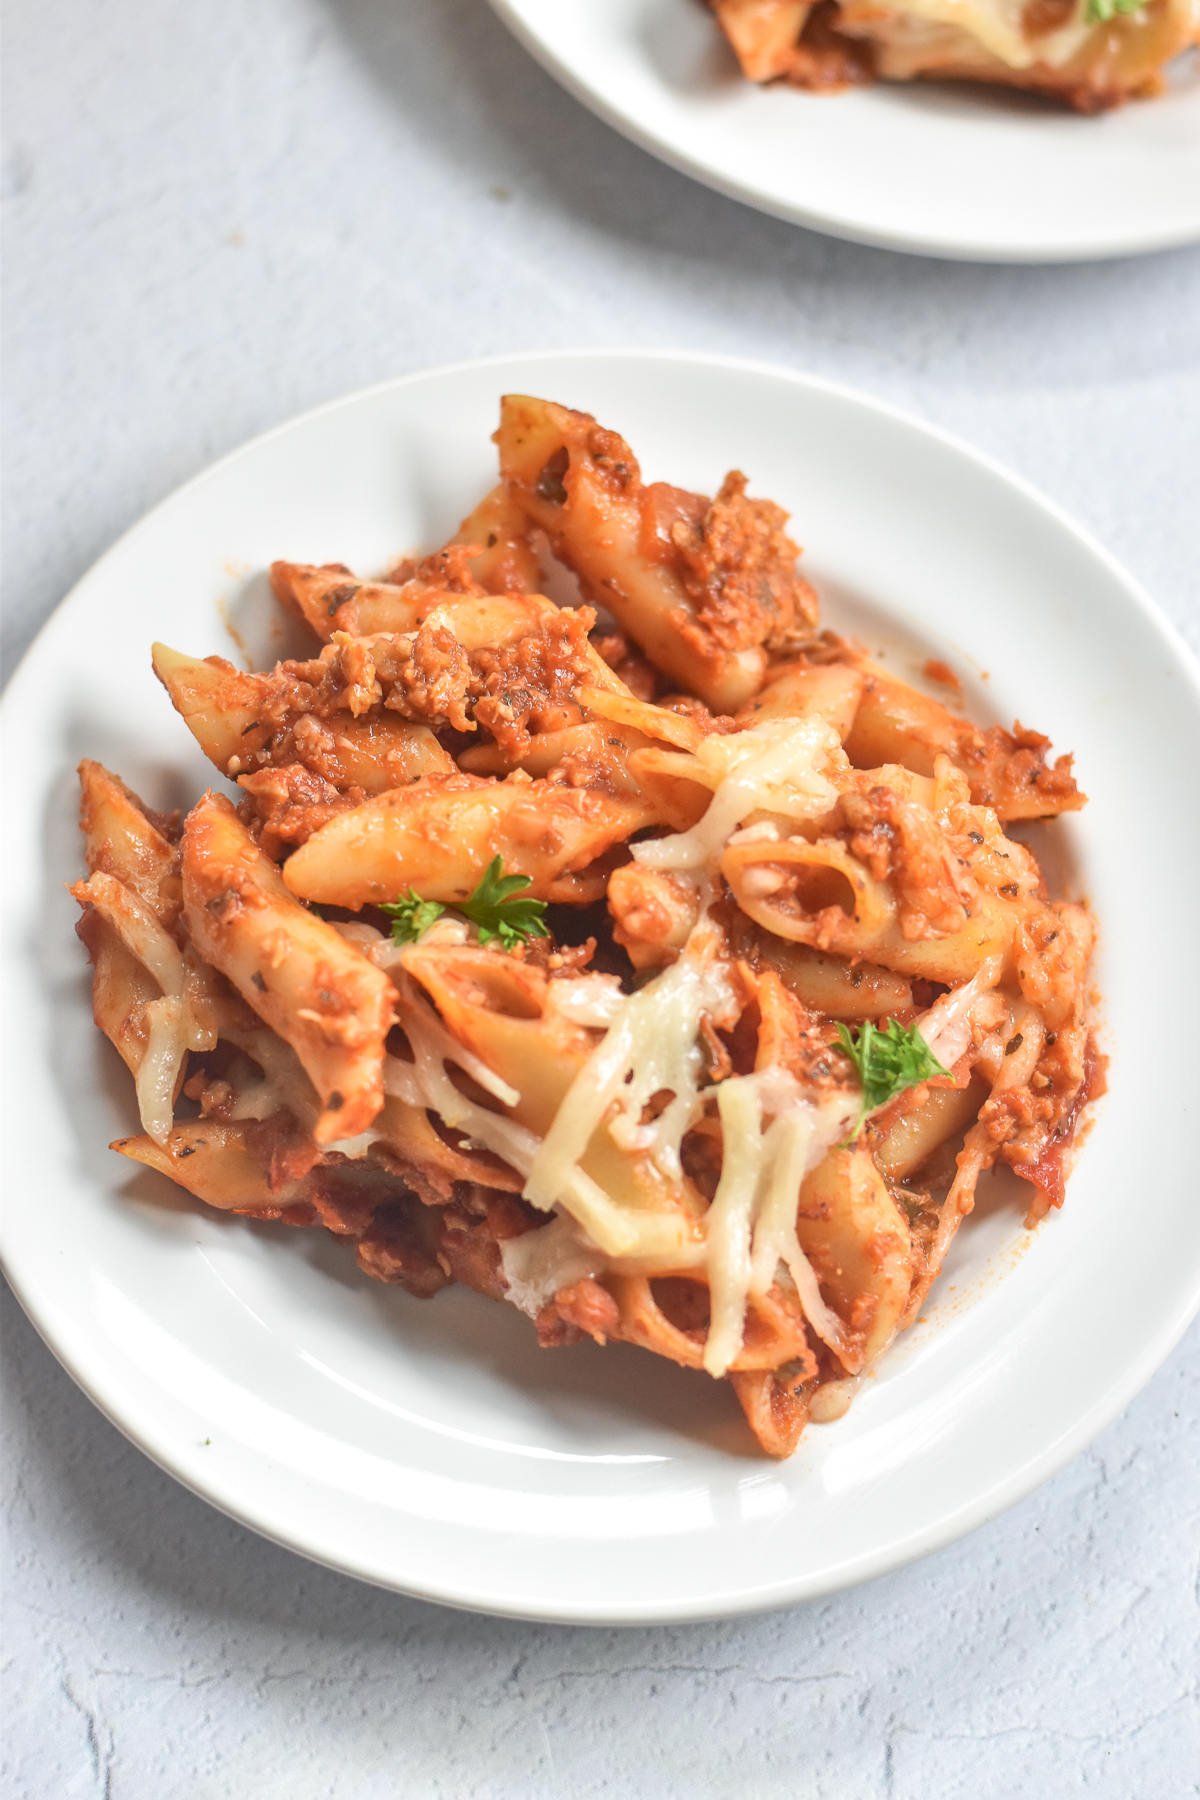 A classic Midwestern inspired casserole—Vegan Baked Mostaccioli is an easy baked pasta recipe featuring Mostaccioli noodles, spicy vegan sausage, marinara sauce, and vegan cheese.